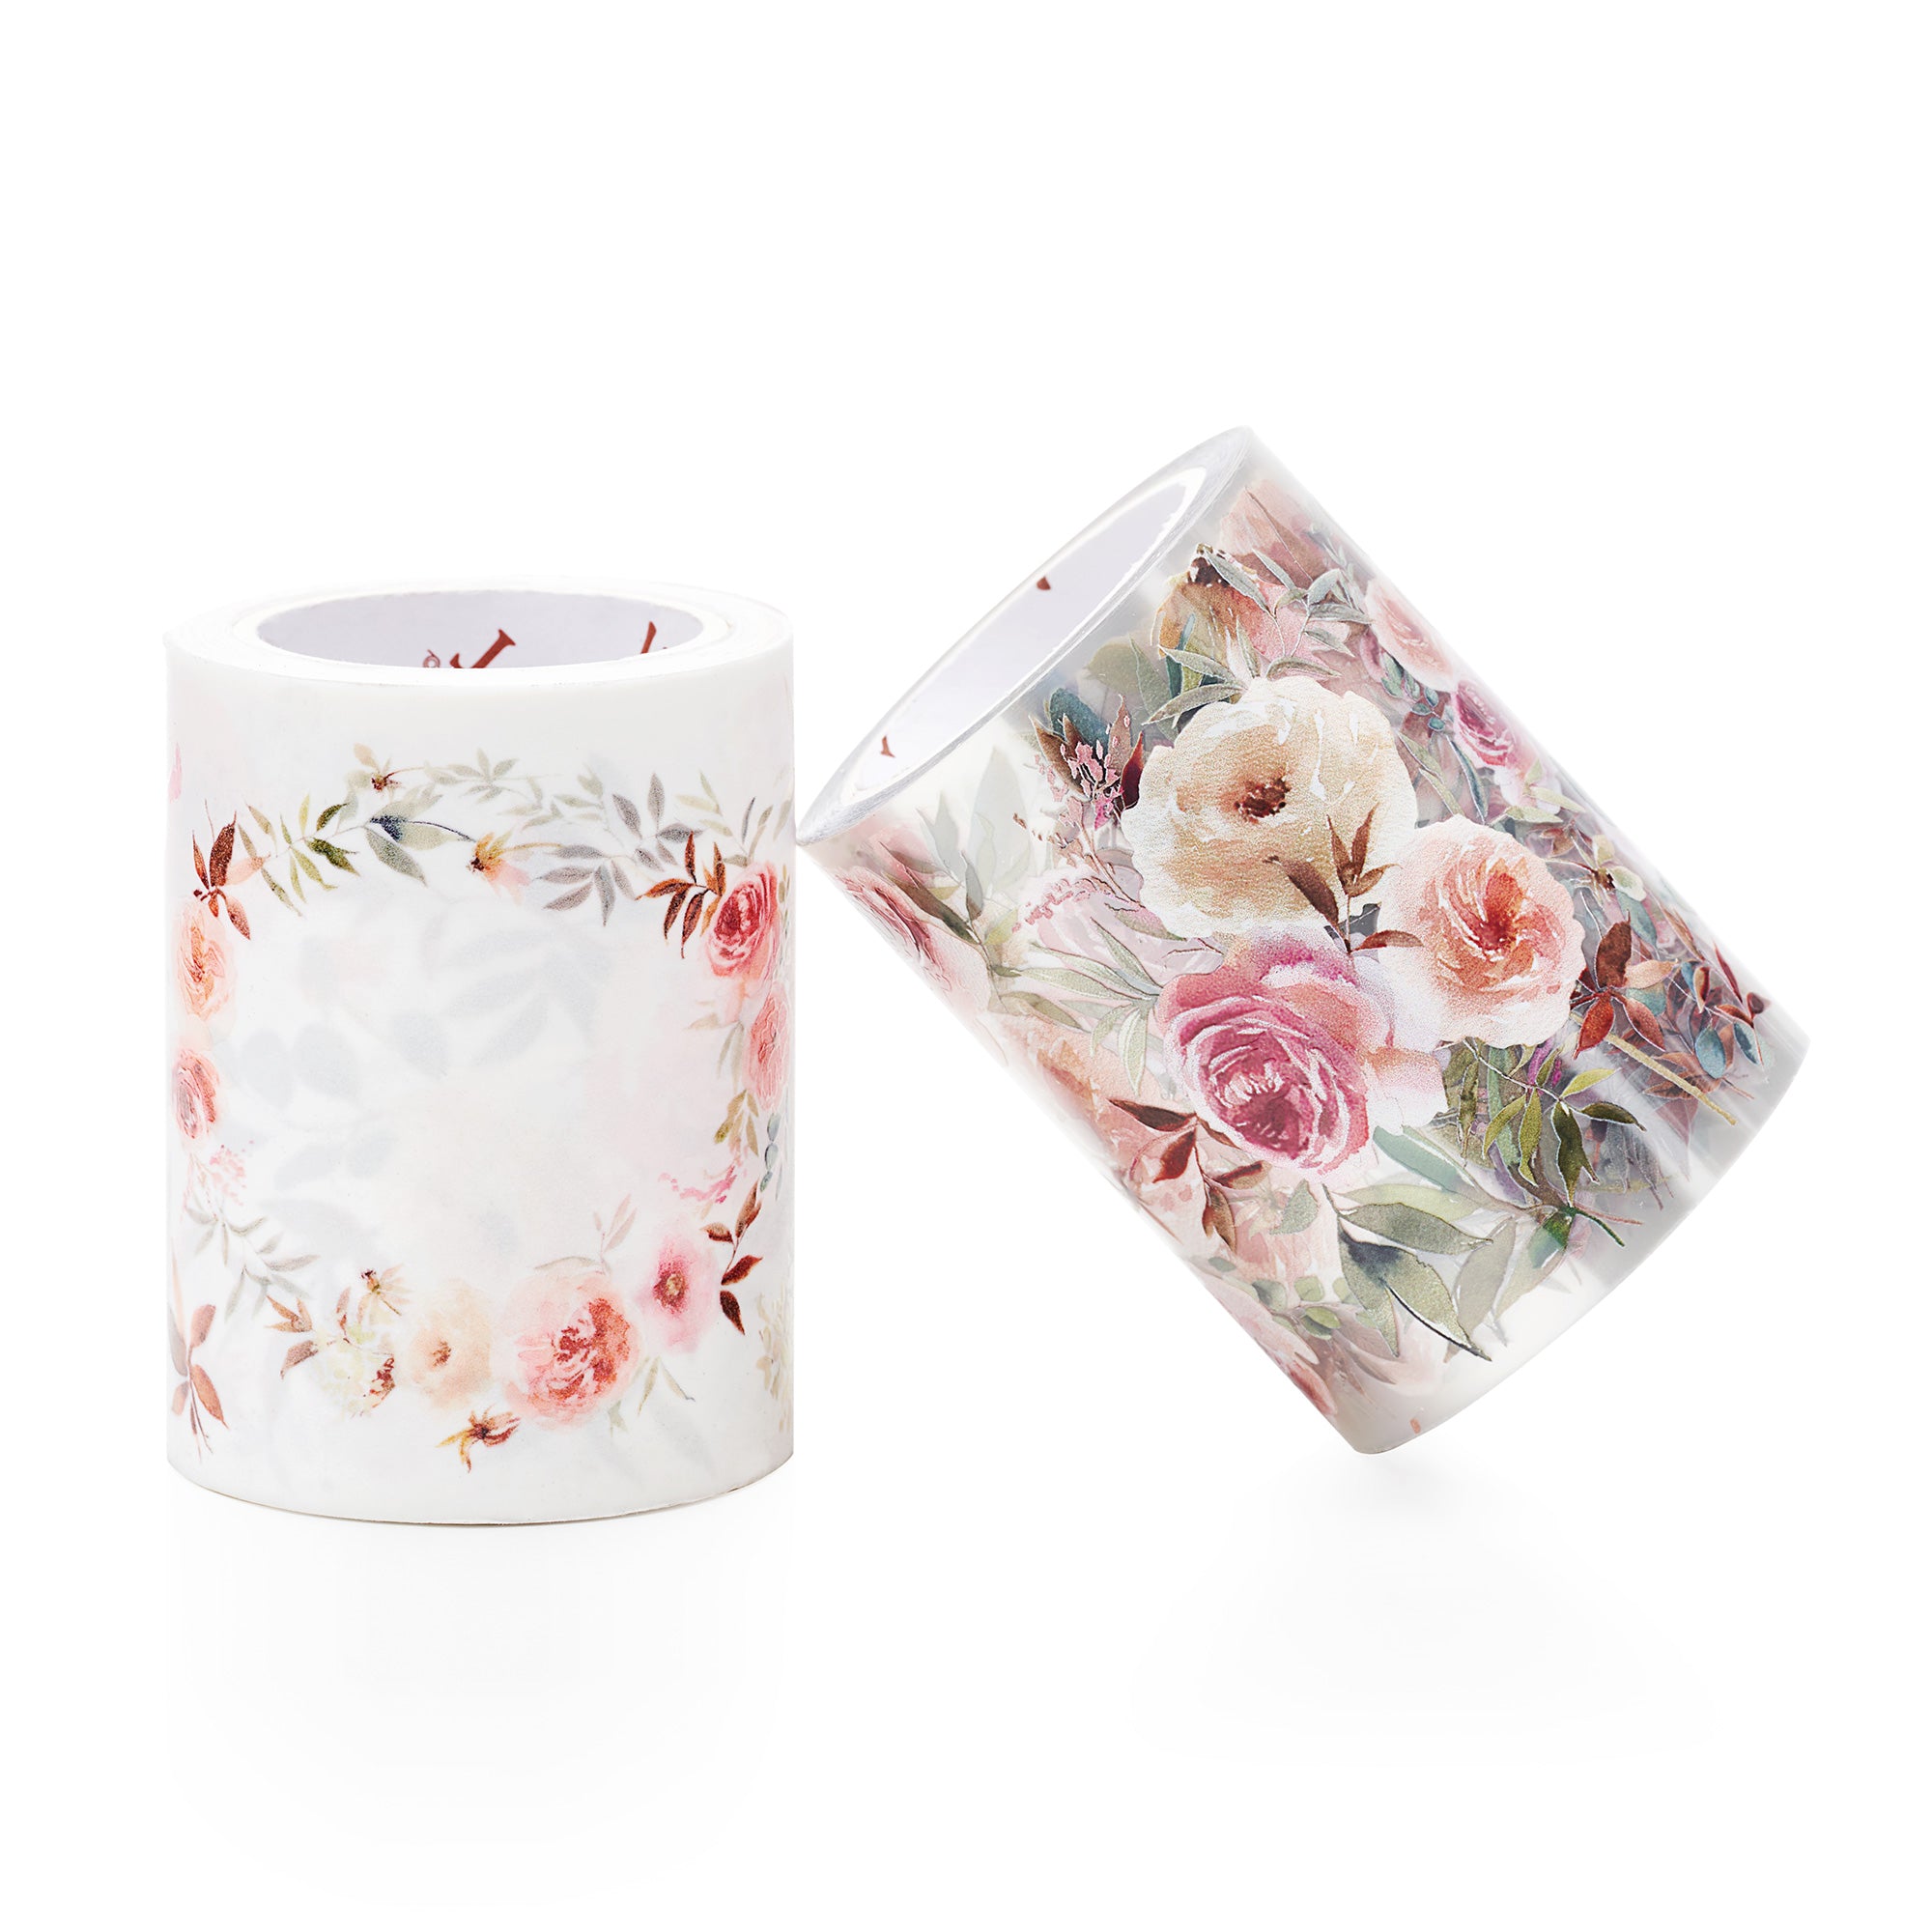 Fall Flowers Wide Washi / PET Tape | The Washi Tape Shop. Beautiful Washi and Decorative Tape For Bullet Journals, Gift Wrapping, Planner Decoration and DIY Projects